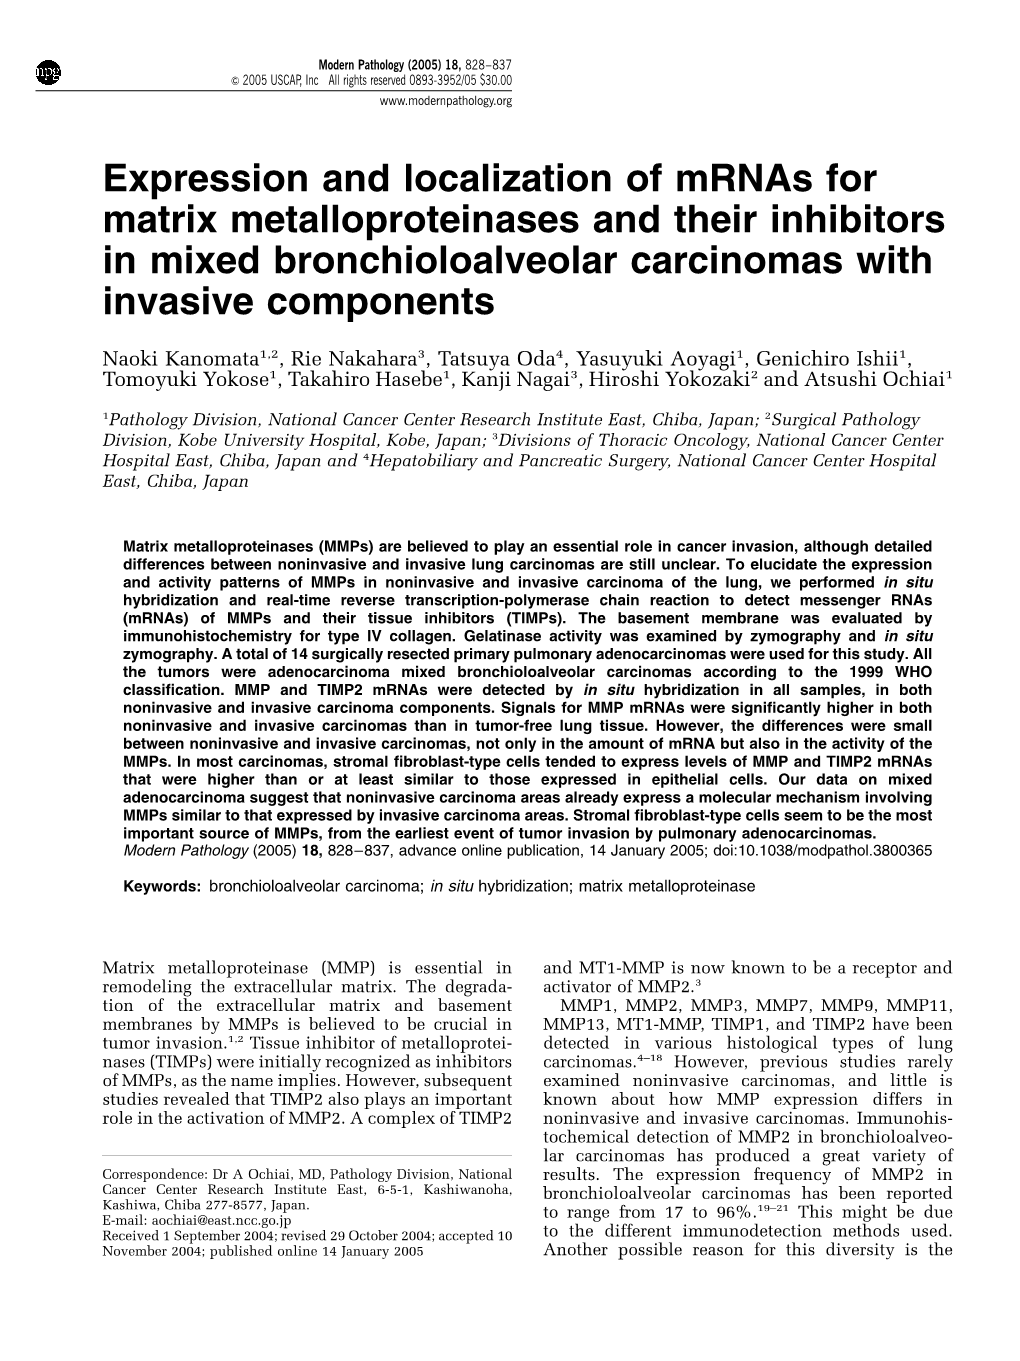 Expression and Localization of Mrnas for Matrix Metalloproteinases and Their Inhibitors in Mixed Bronchioloalveolar Carcinomas with Invasive Components